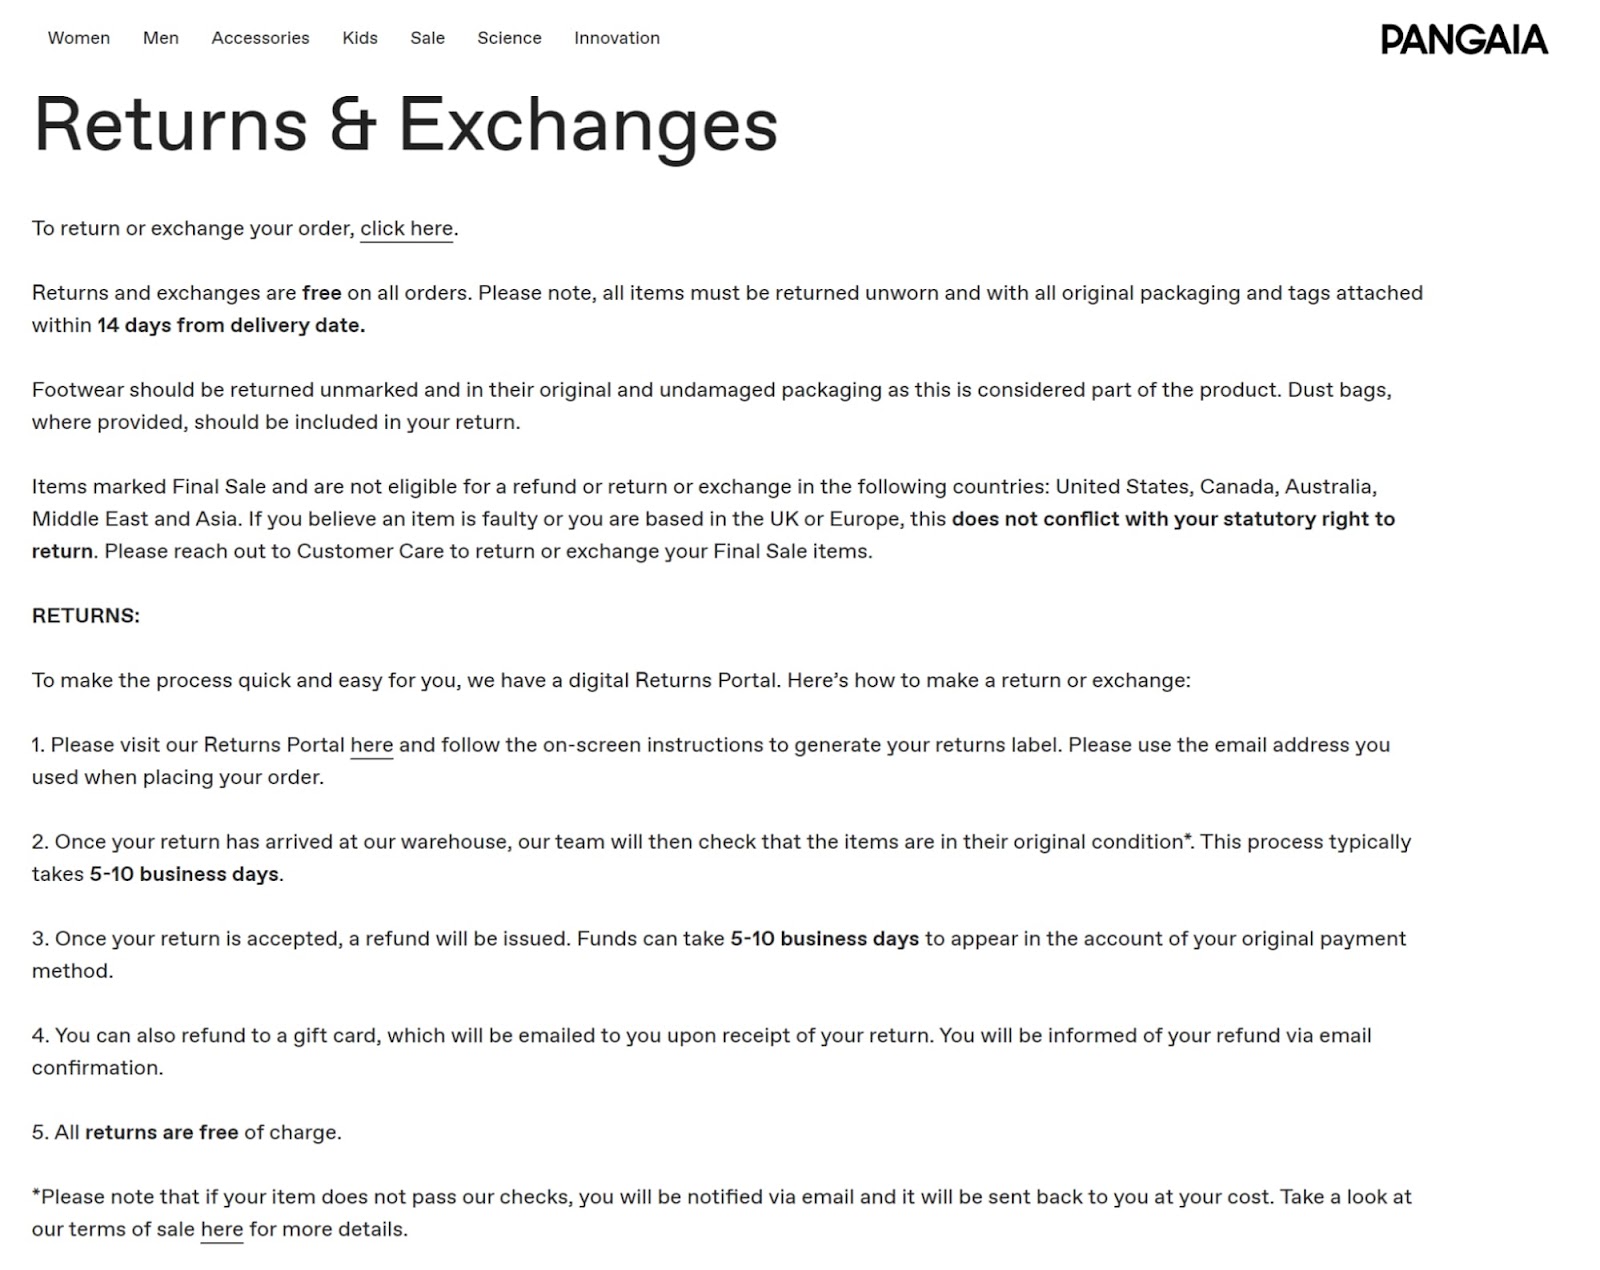 returns and exchanges policy page pangaia